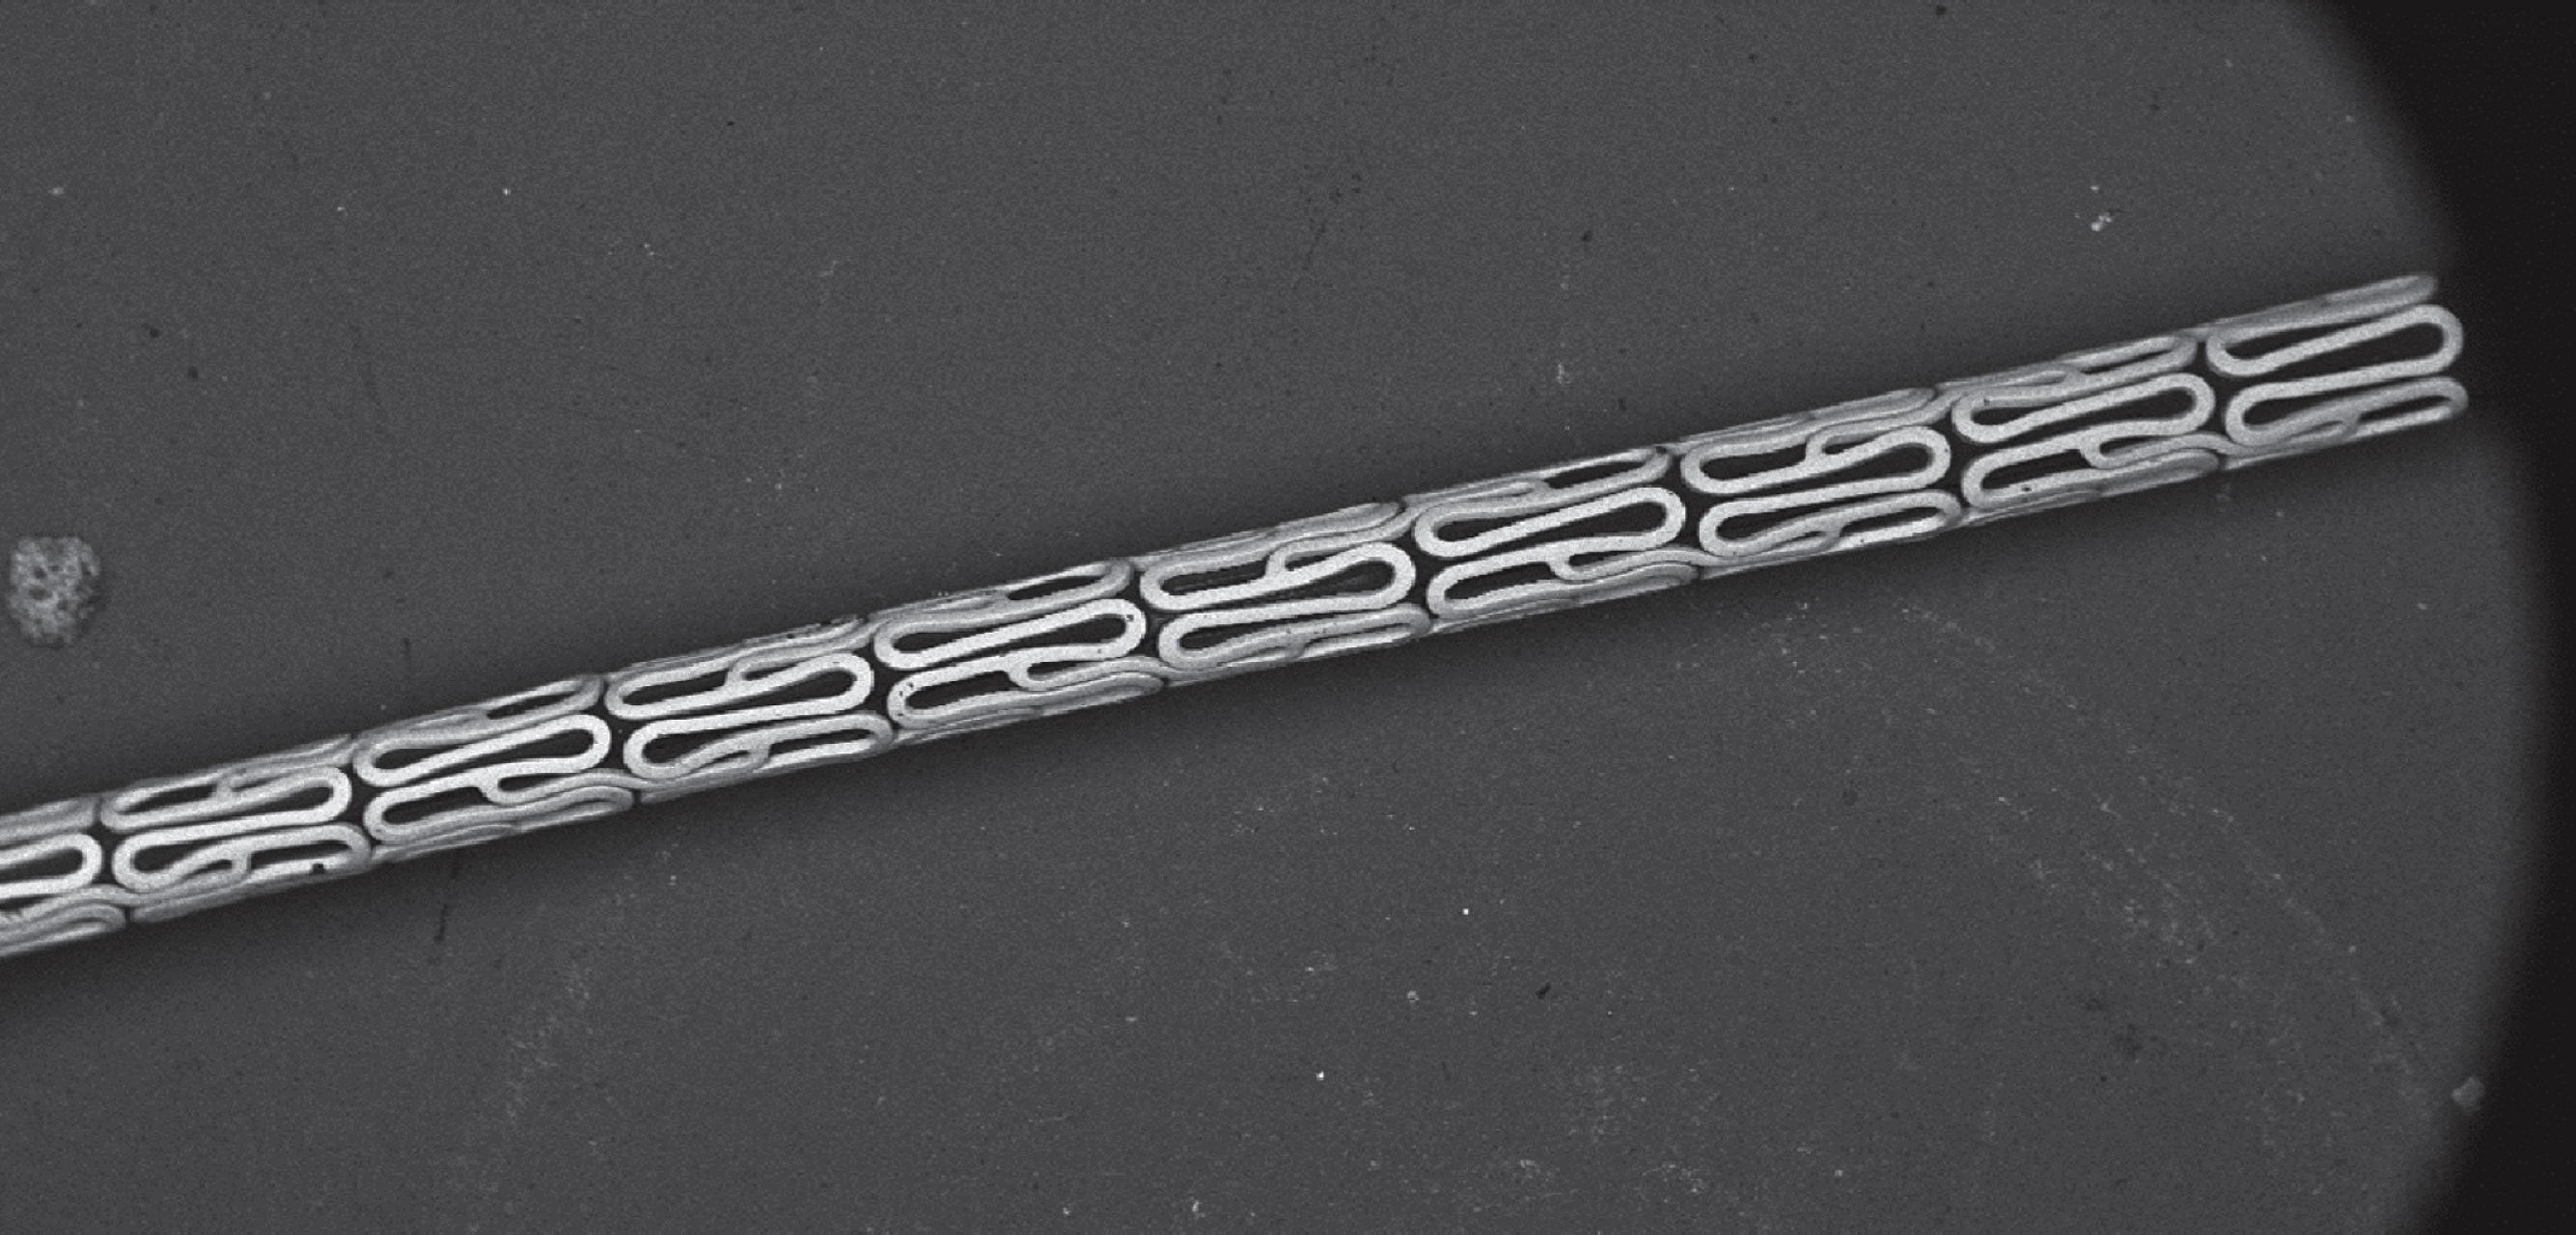 SEM Image of a MultiLinkTM stent prior to dilation (primary magnification 1:9).